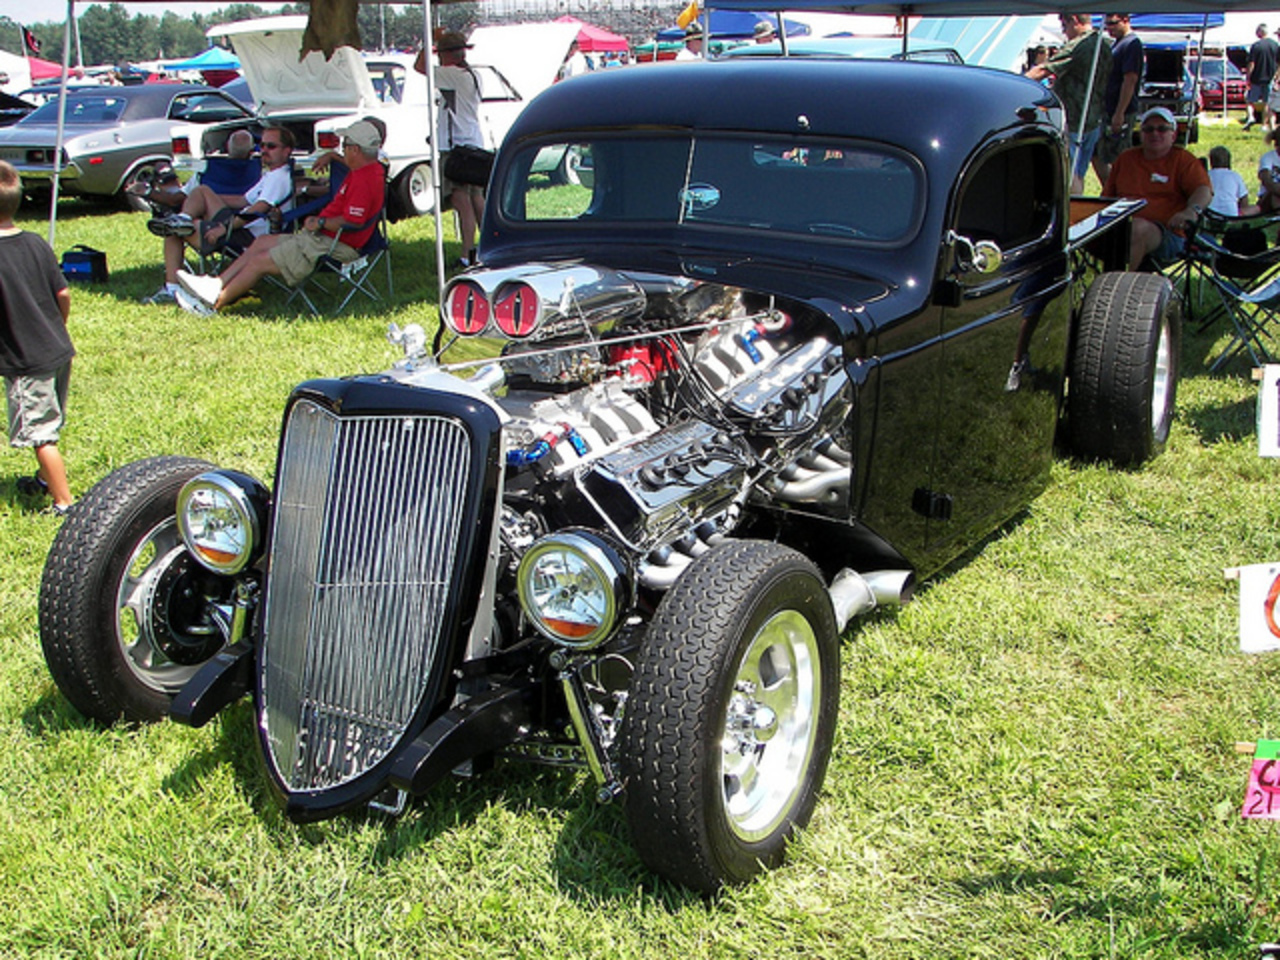 Dodge Streetrod pickup. Looks to be mid Thirties with a Ford grill